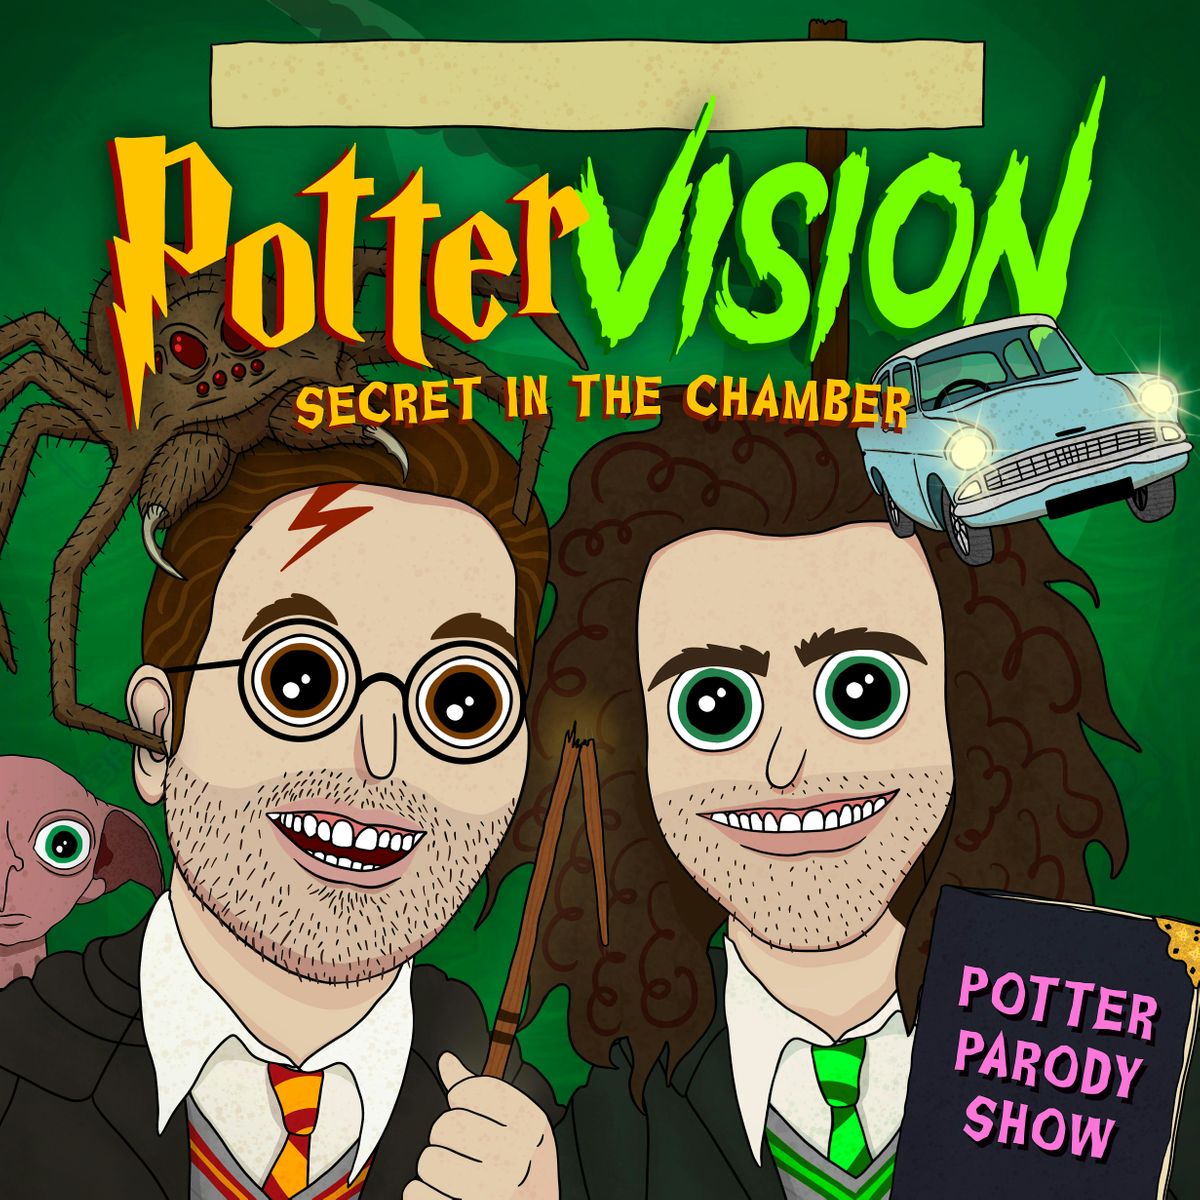 Pottervision: Secret in the Chamber